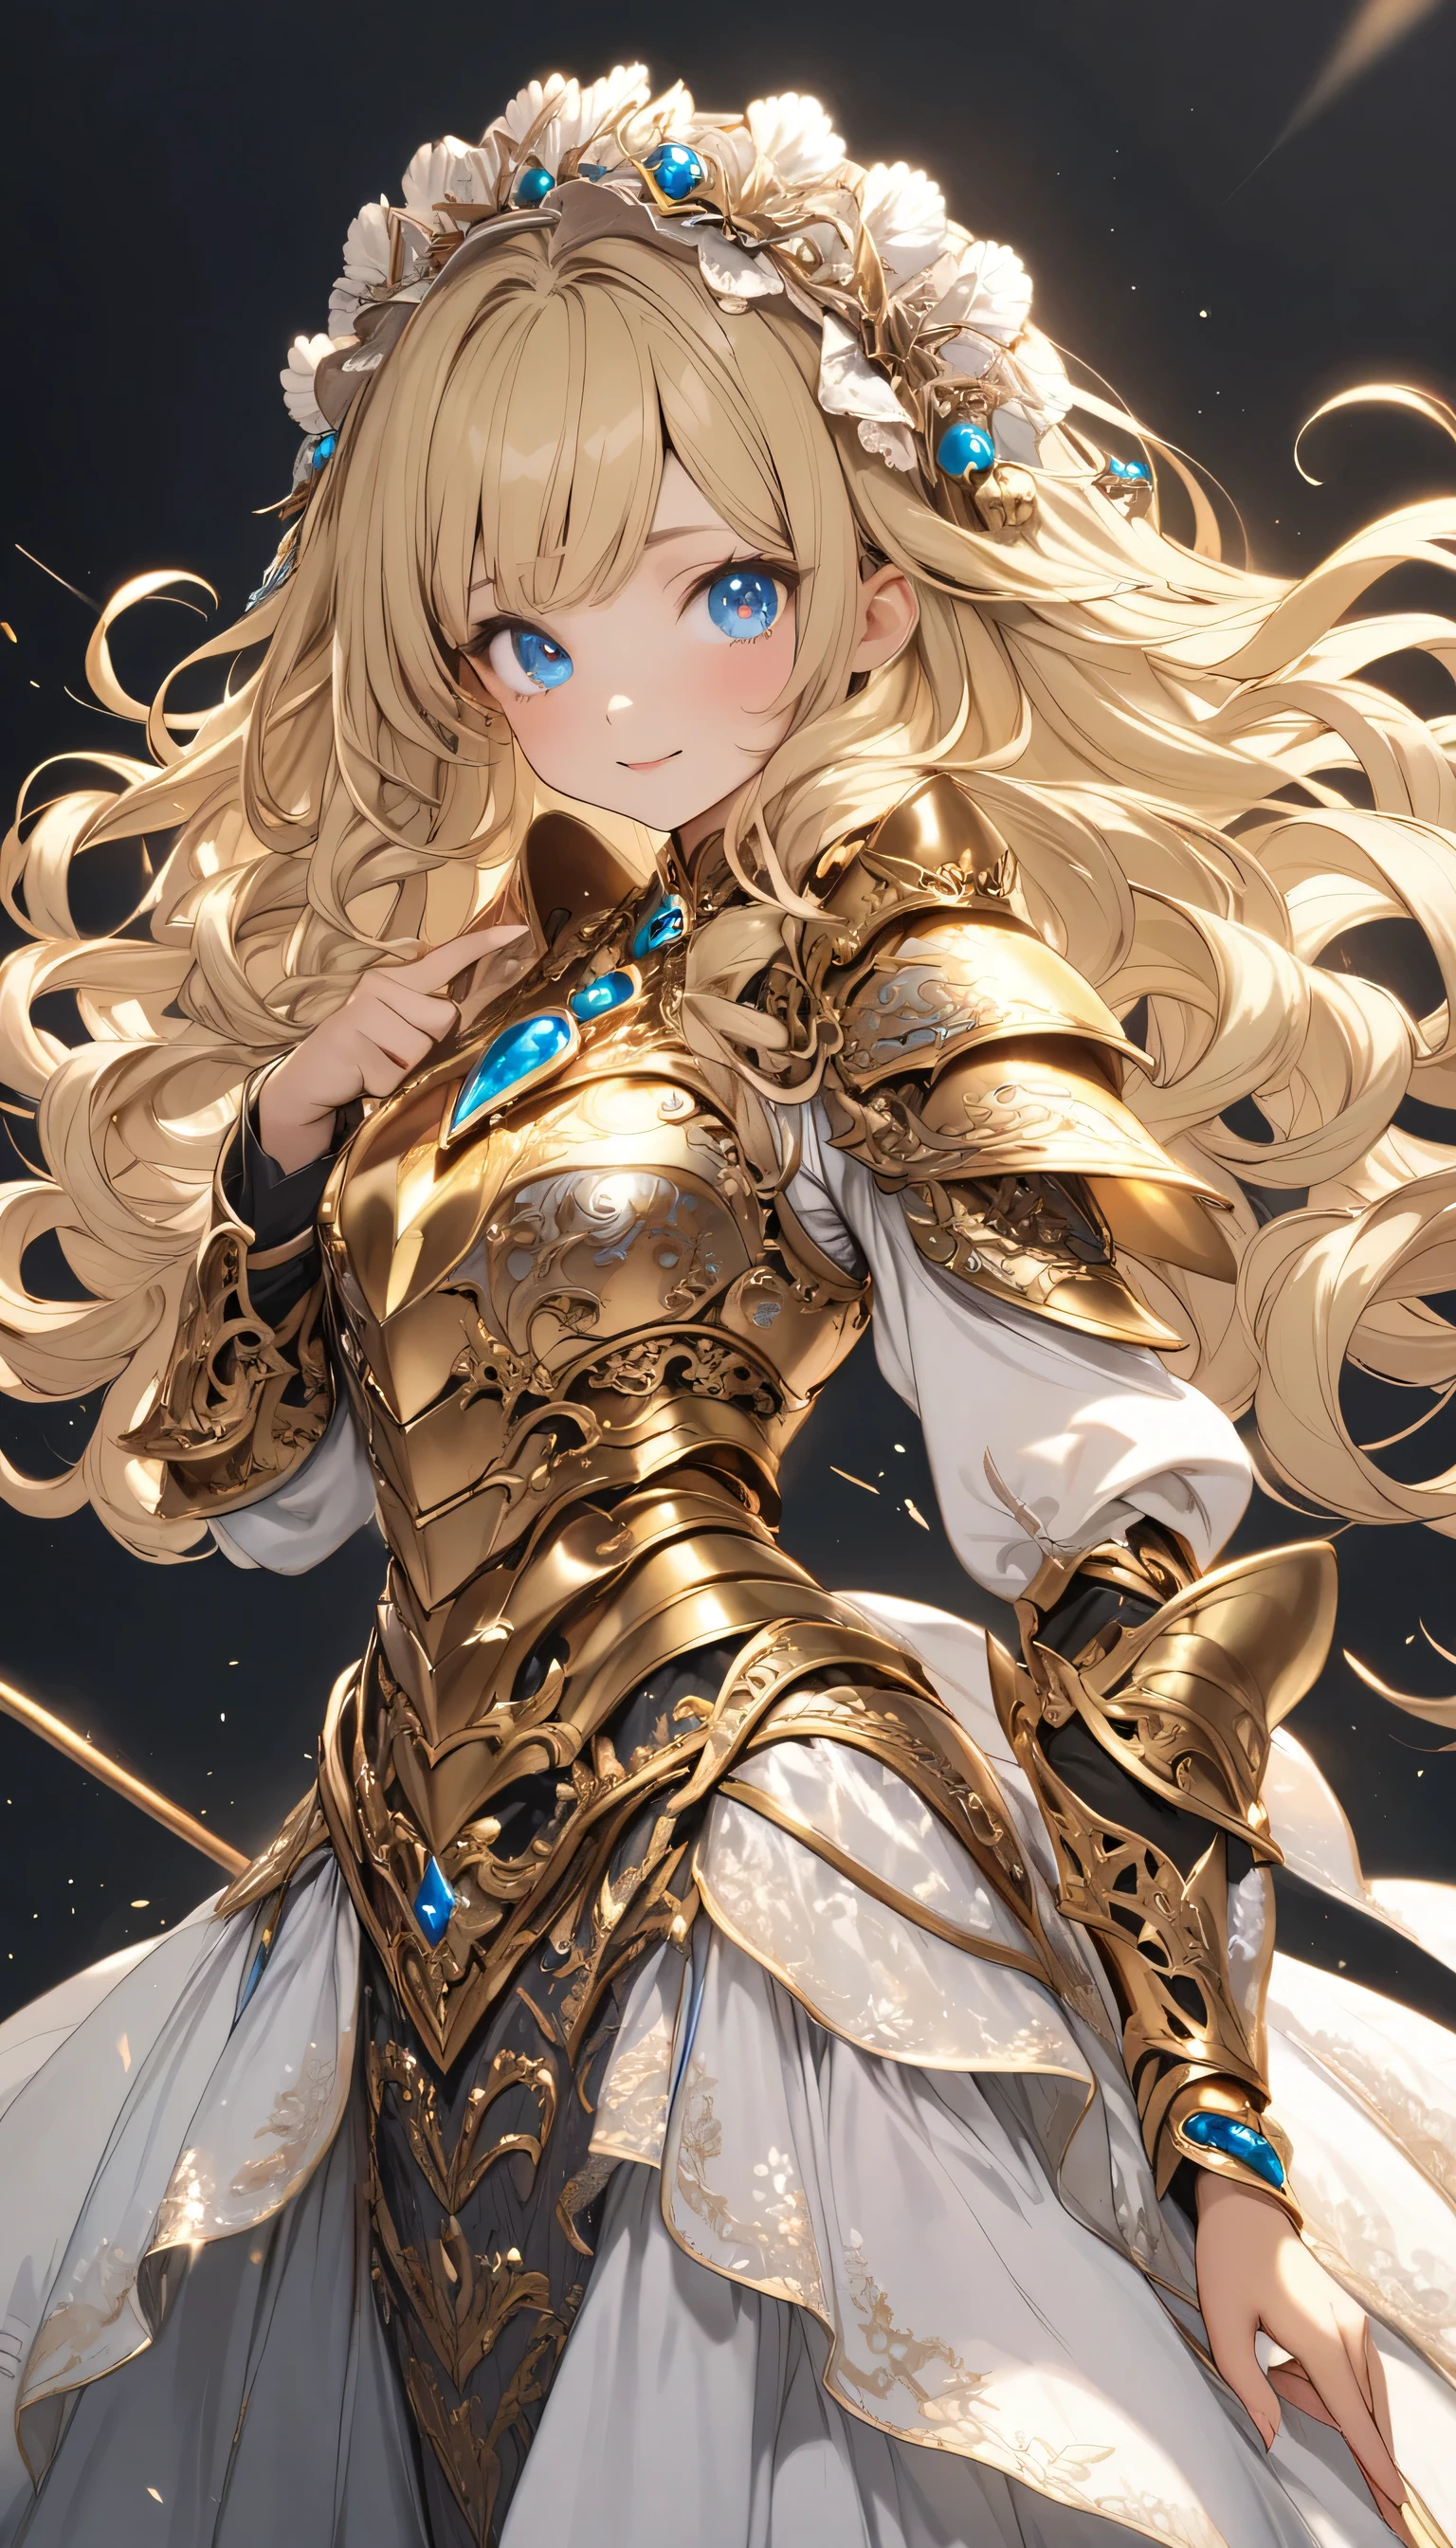 masterpiece、Best Quality、Very detailed、High resolution、Japanese anime、1girl、Blonde Hair、（Medium length hair：1.4）、Side braid hair、Curly Hair、Wavy Hair、Drill Hair、Curly Outward Hair、Dragon Horn、（blue eyes：1.5）、（Beautiful detailed eyes：1.4）、Laughter、12 years old、3 heads、original character、Fantasy、（Black Background：1.2）、whole body、Beautiful fingers、Are standing、（Gold Lace Frill Armor Dress：1.5）、（Jeweled Headgear：1.5）、Photographed from the front、View your viewers